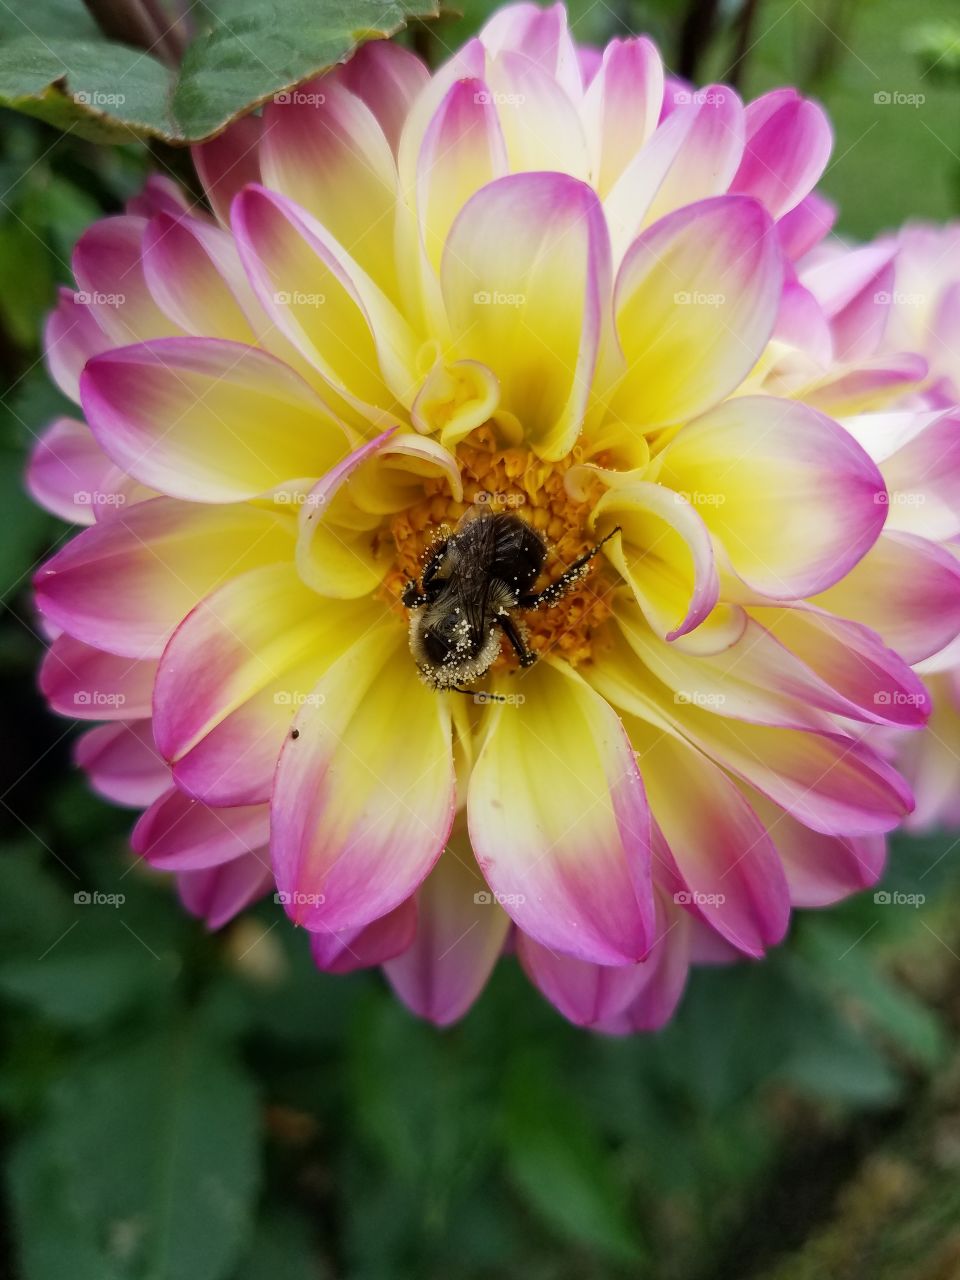 Bumblebee in the flower